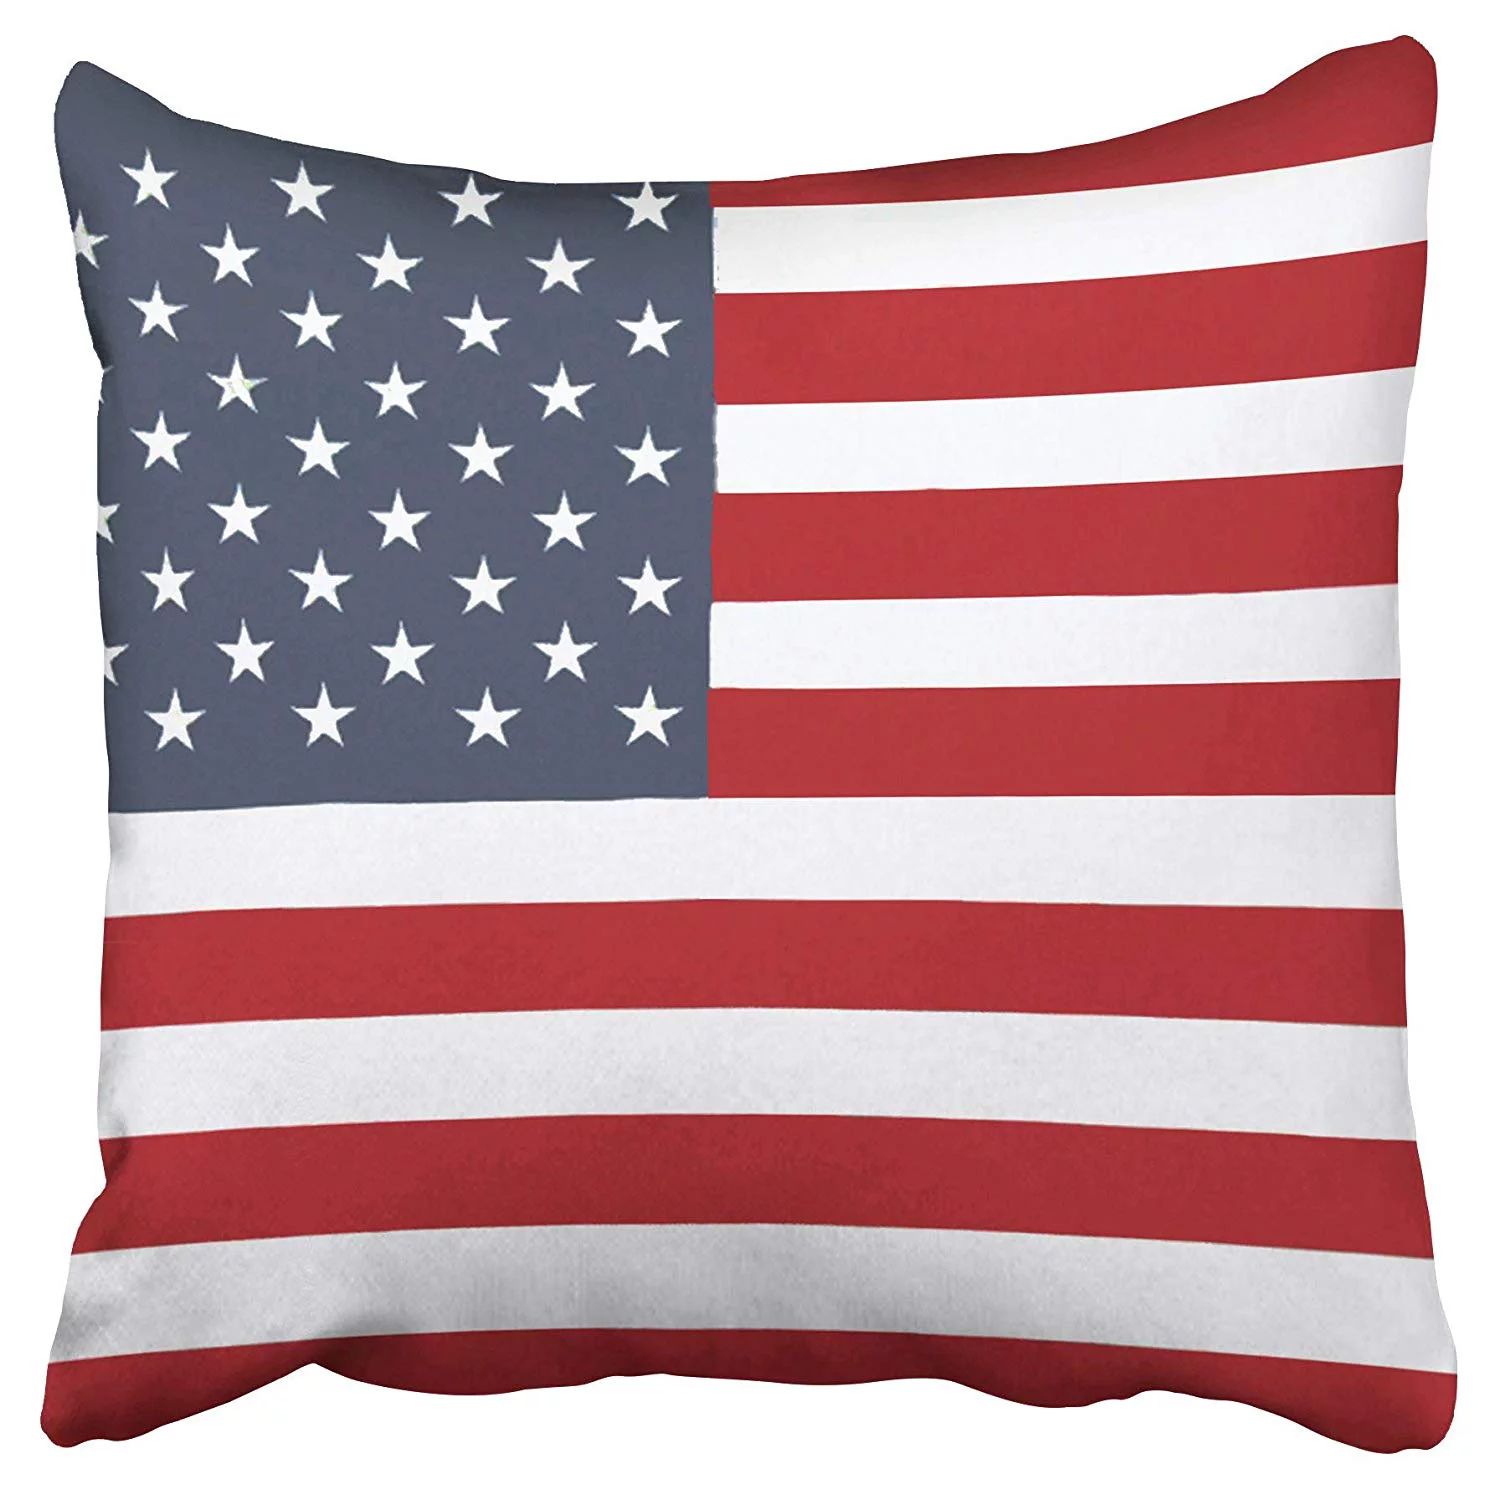 ECCOT Patriotic American Flag Red White Blue Pillow Case Pillow Cover 20x20 inch | Walmart (US)